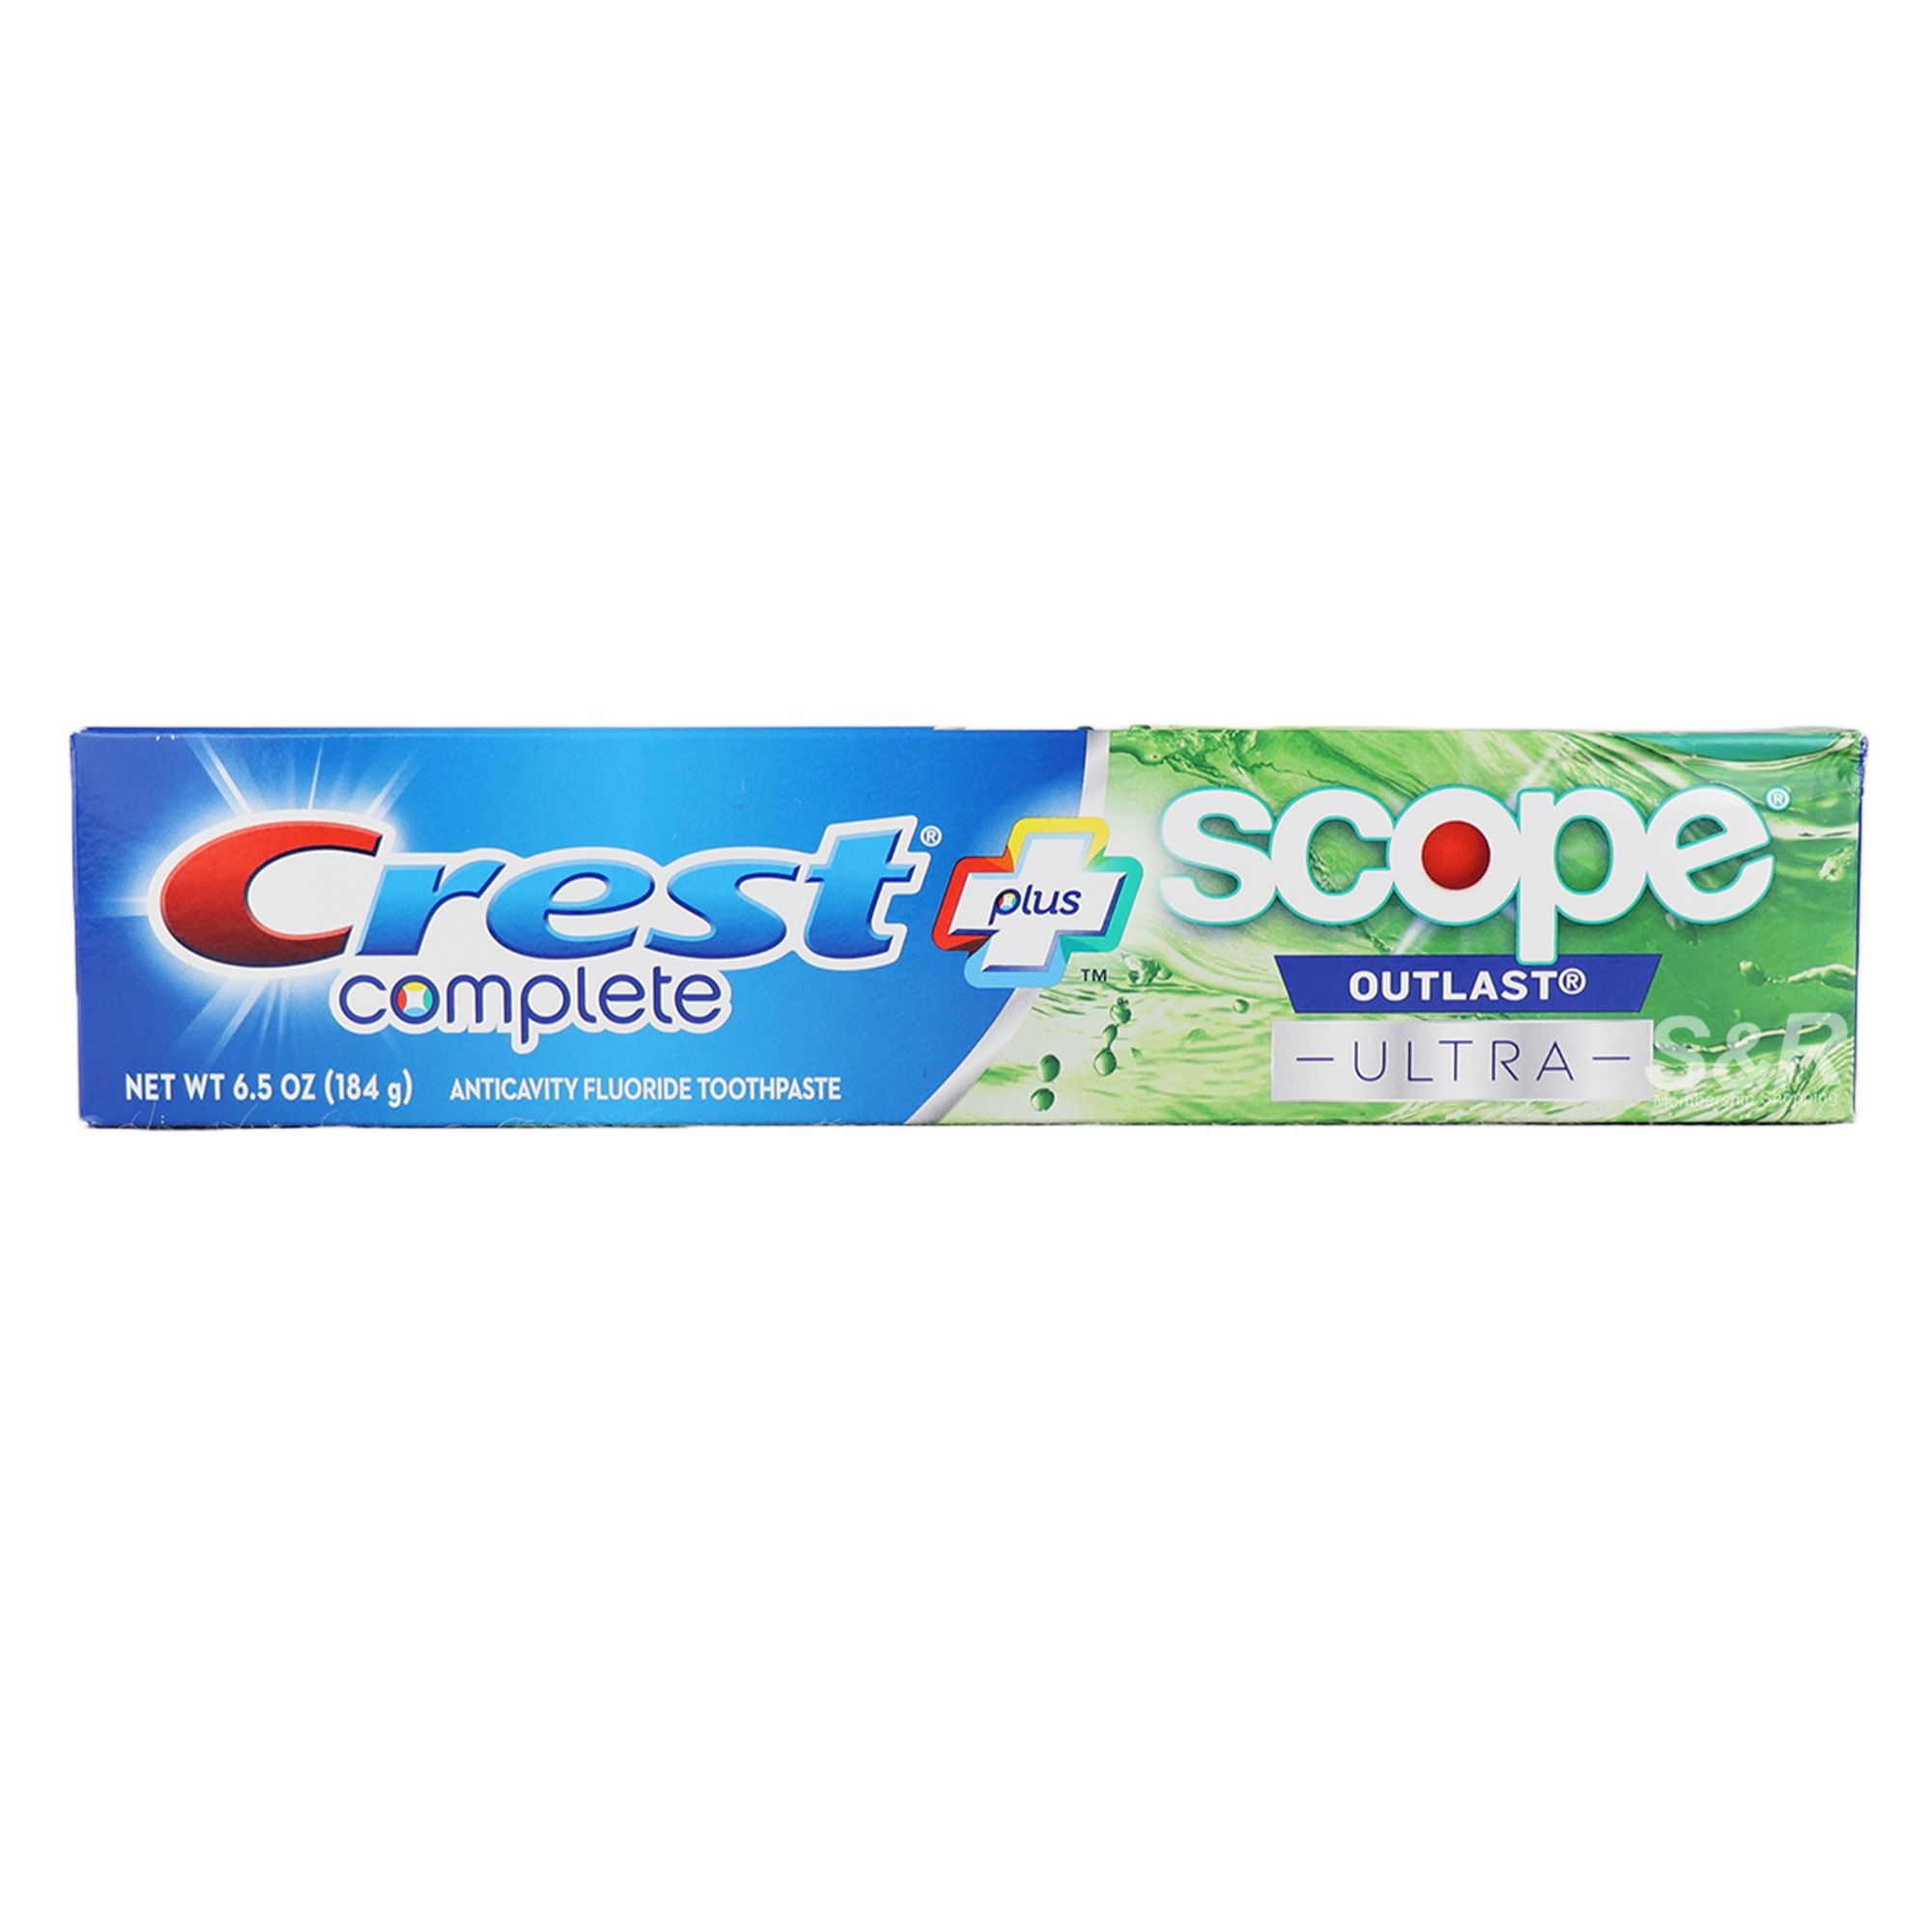 Crest Complete Whitening + Scope Outlast Ultra Anticavity Fluoride Toothpaste 184g